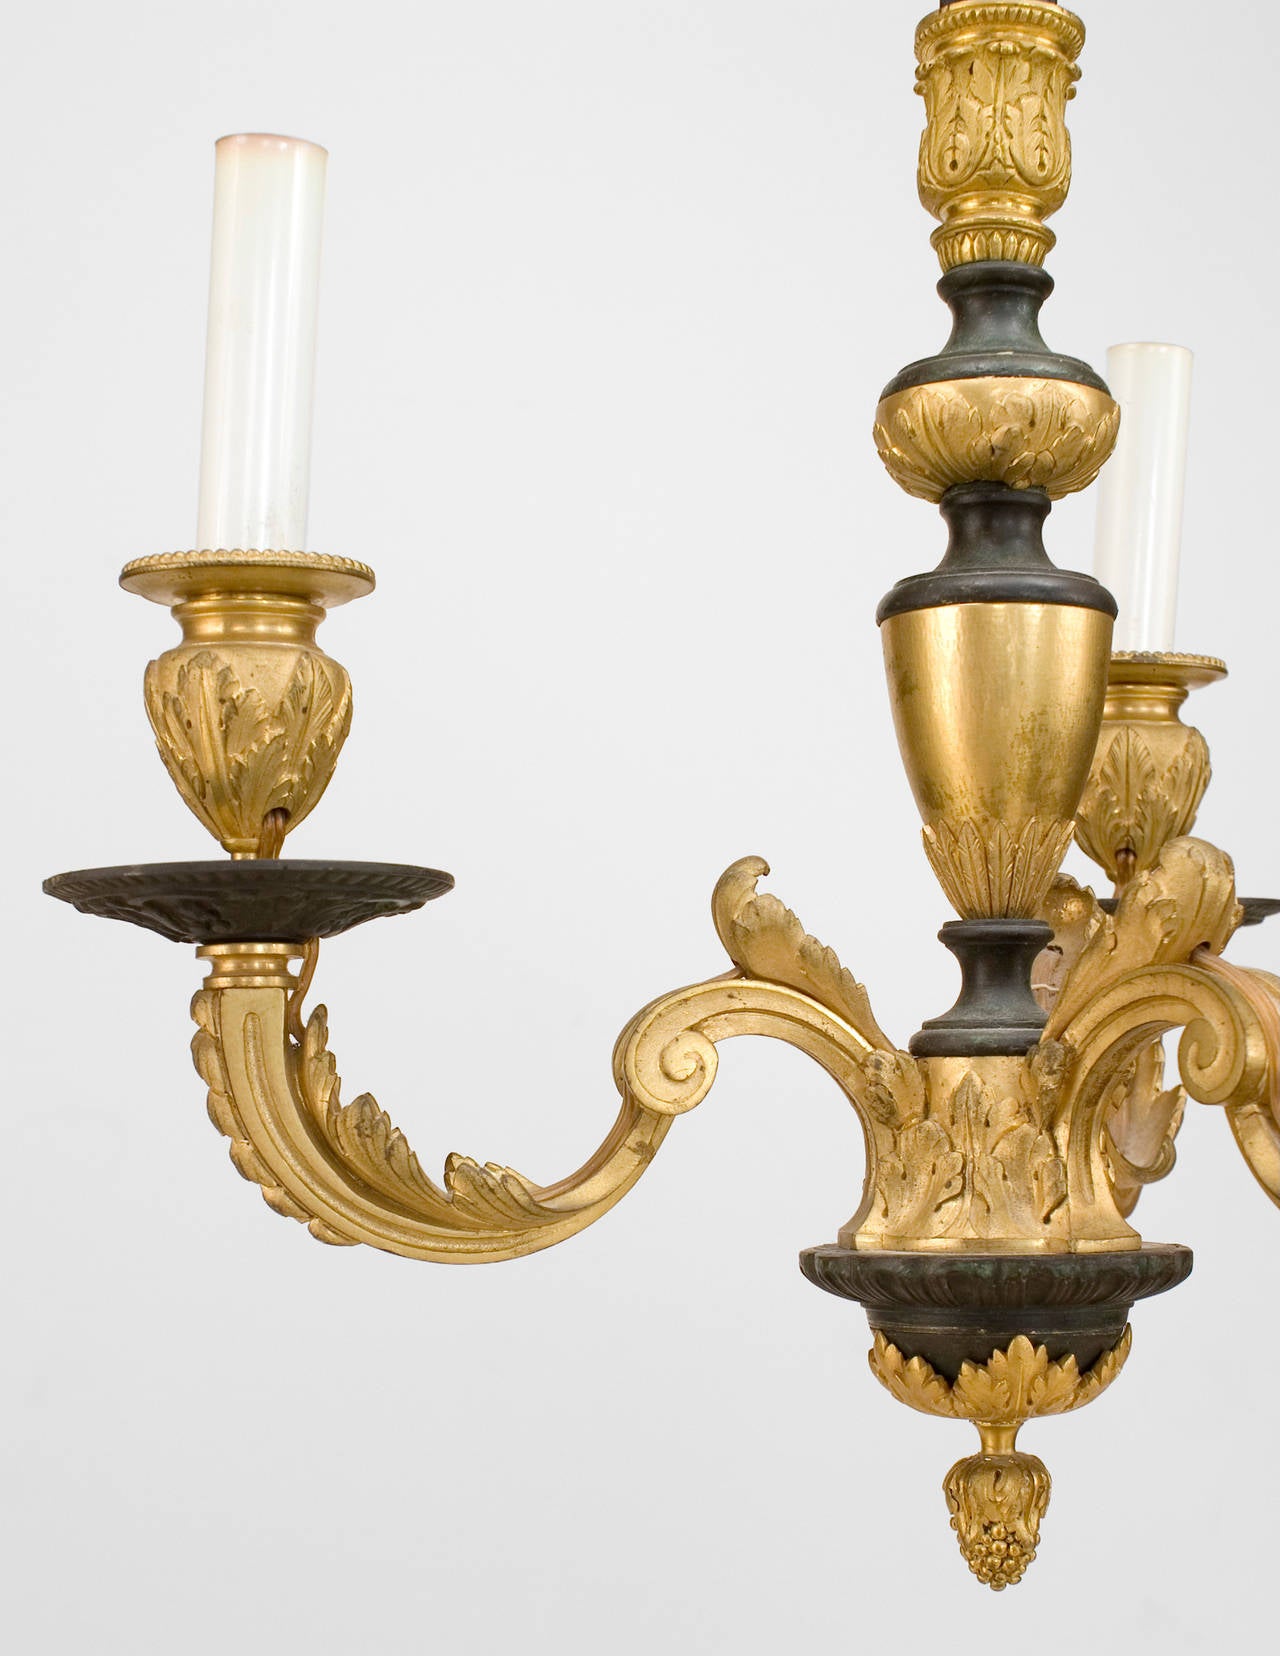 French Victorian-style (19/20th Century) bronze black and gilt chandelier with 3 scroll arms and a fluted center post with an acorn finial bottom.
